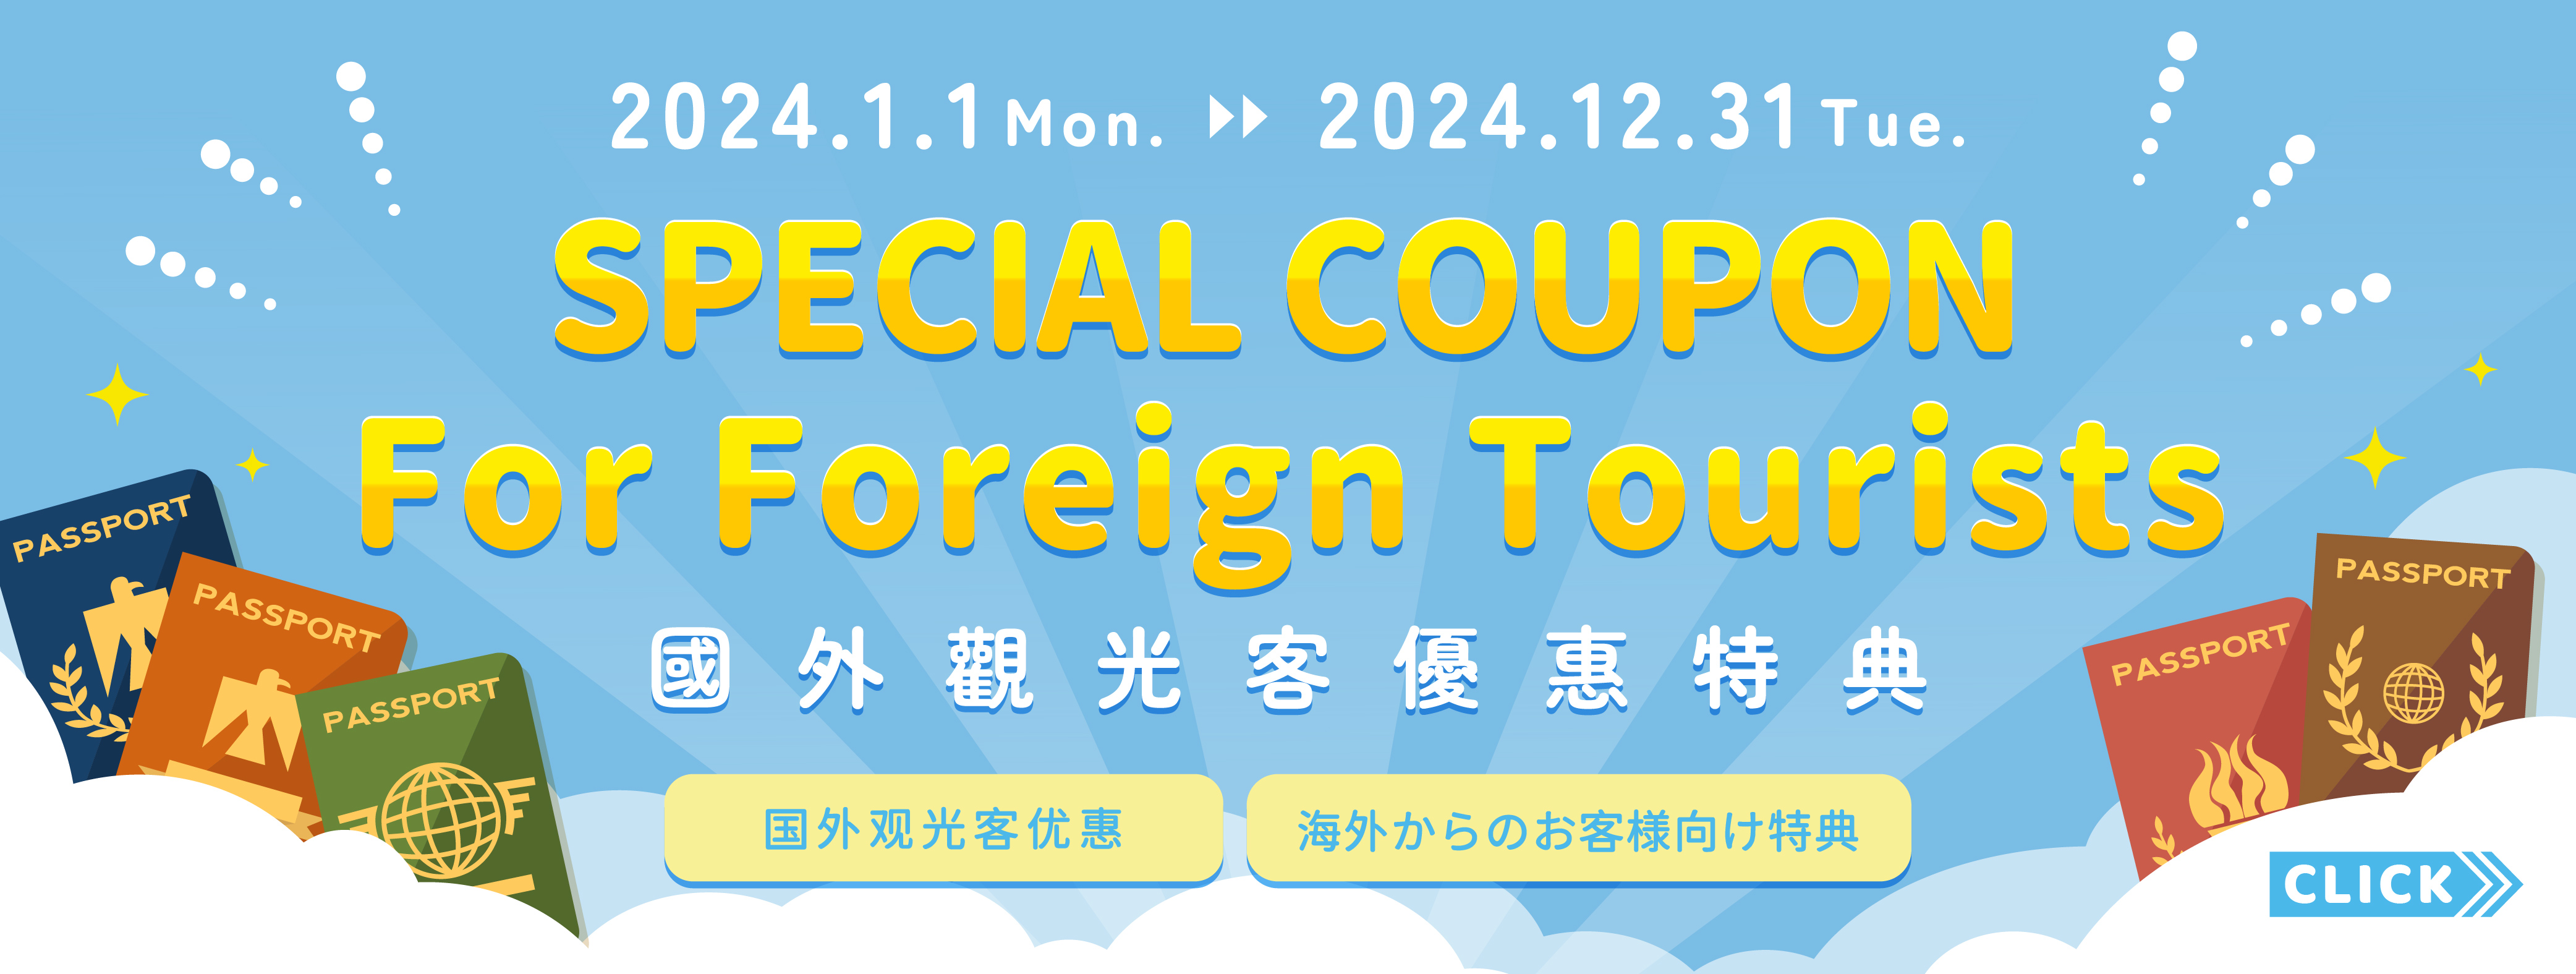 SPECIAL COUPON For Foreign Tourists_日